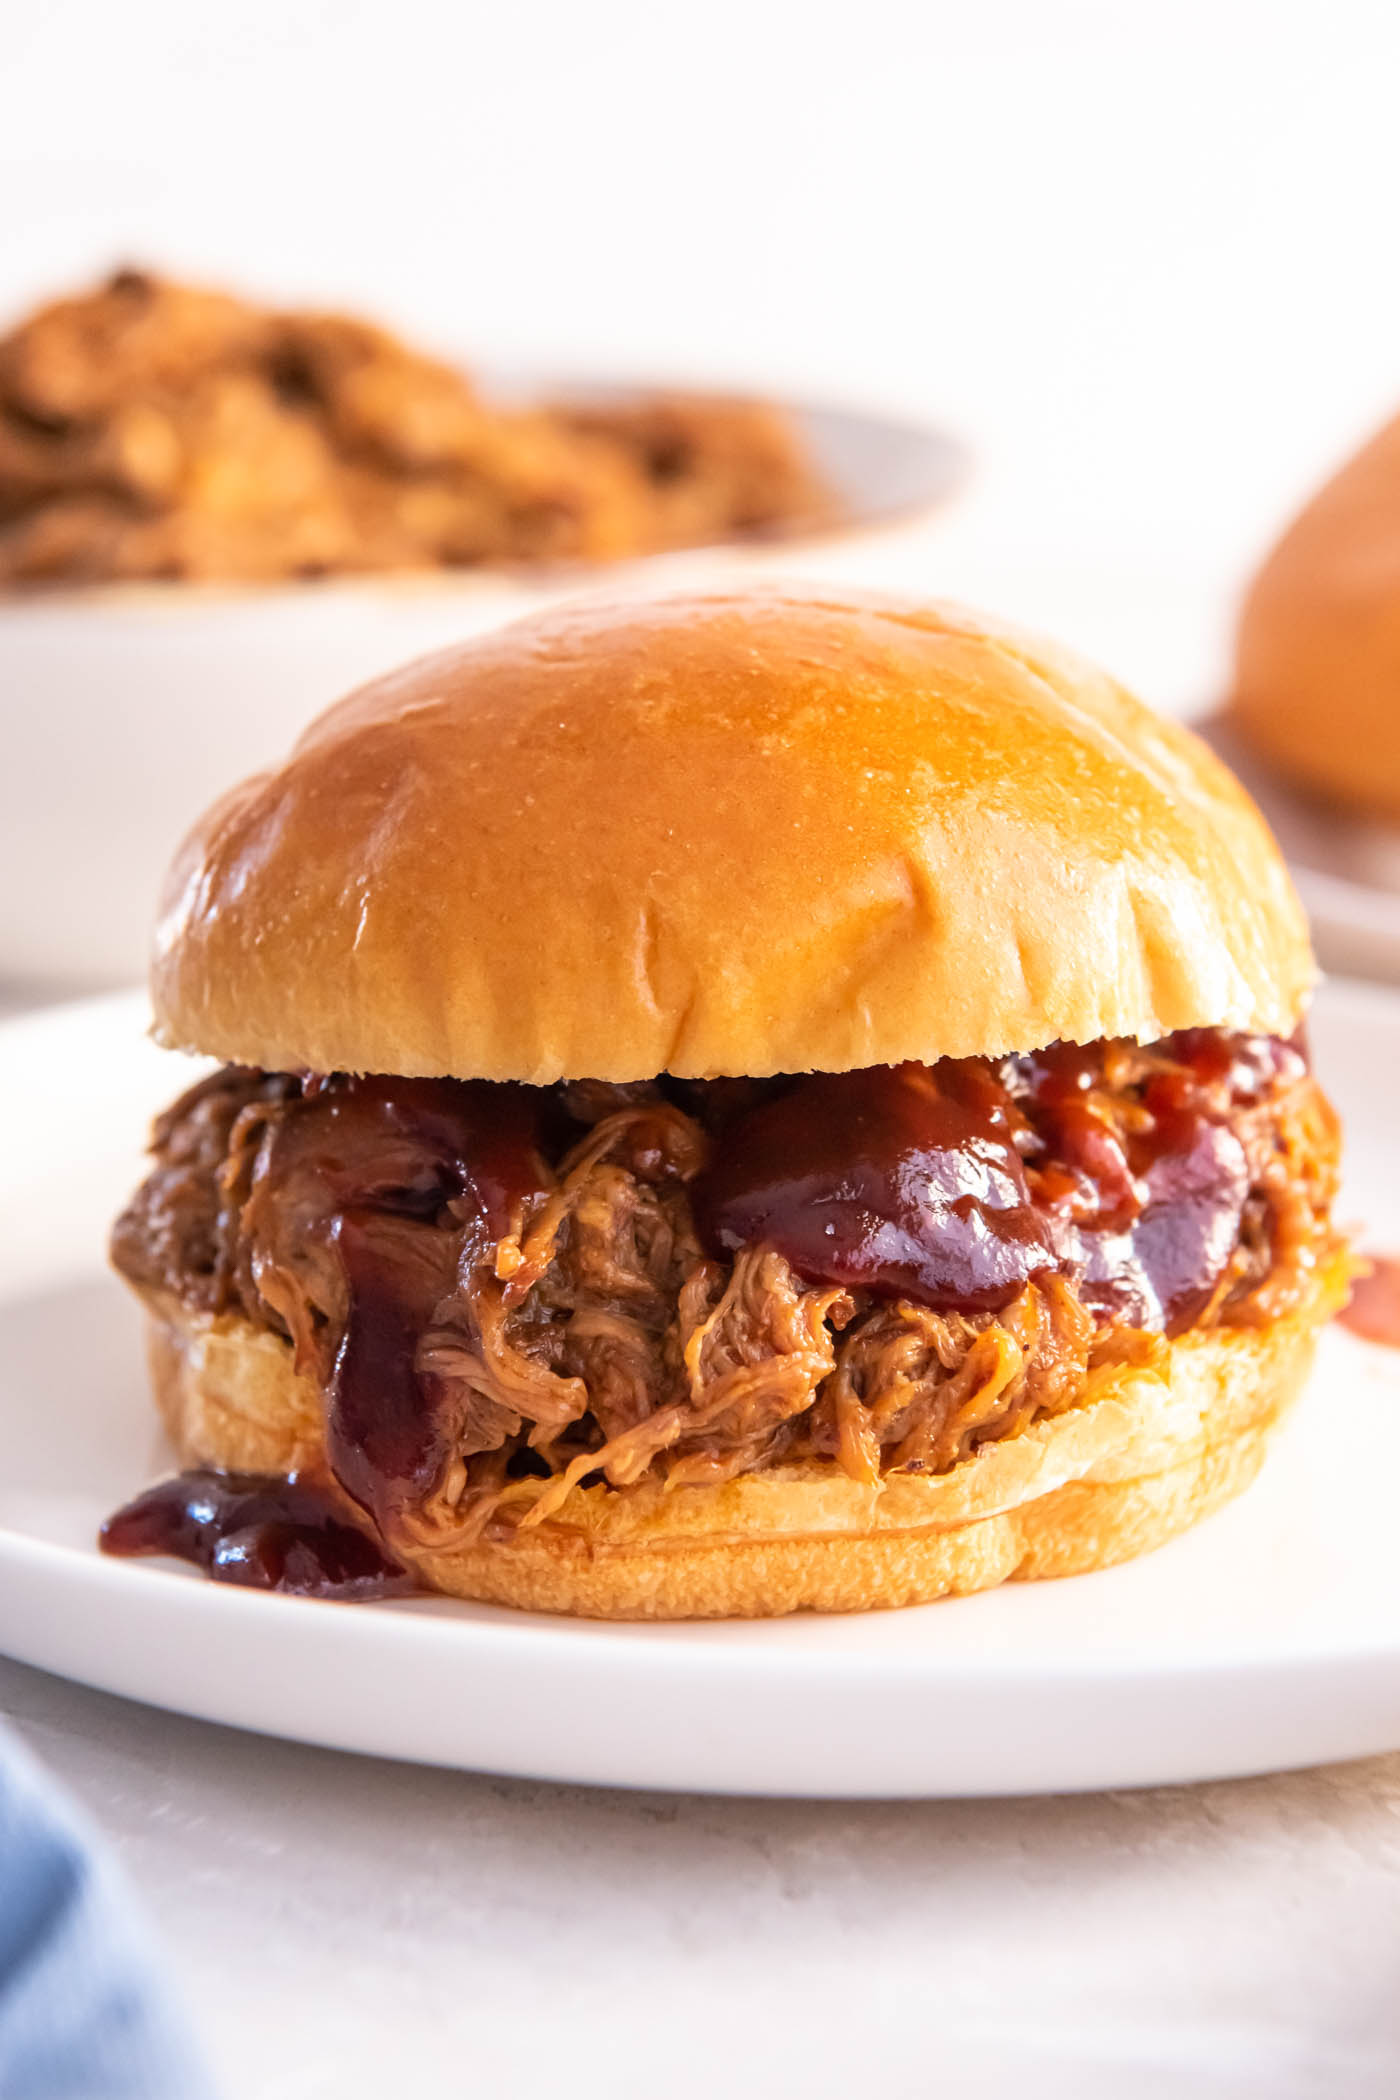 BBQ pulled pork sandwich served on a burger bun with extra bbq sauce.